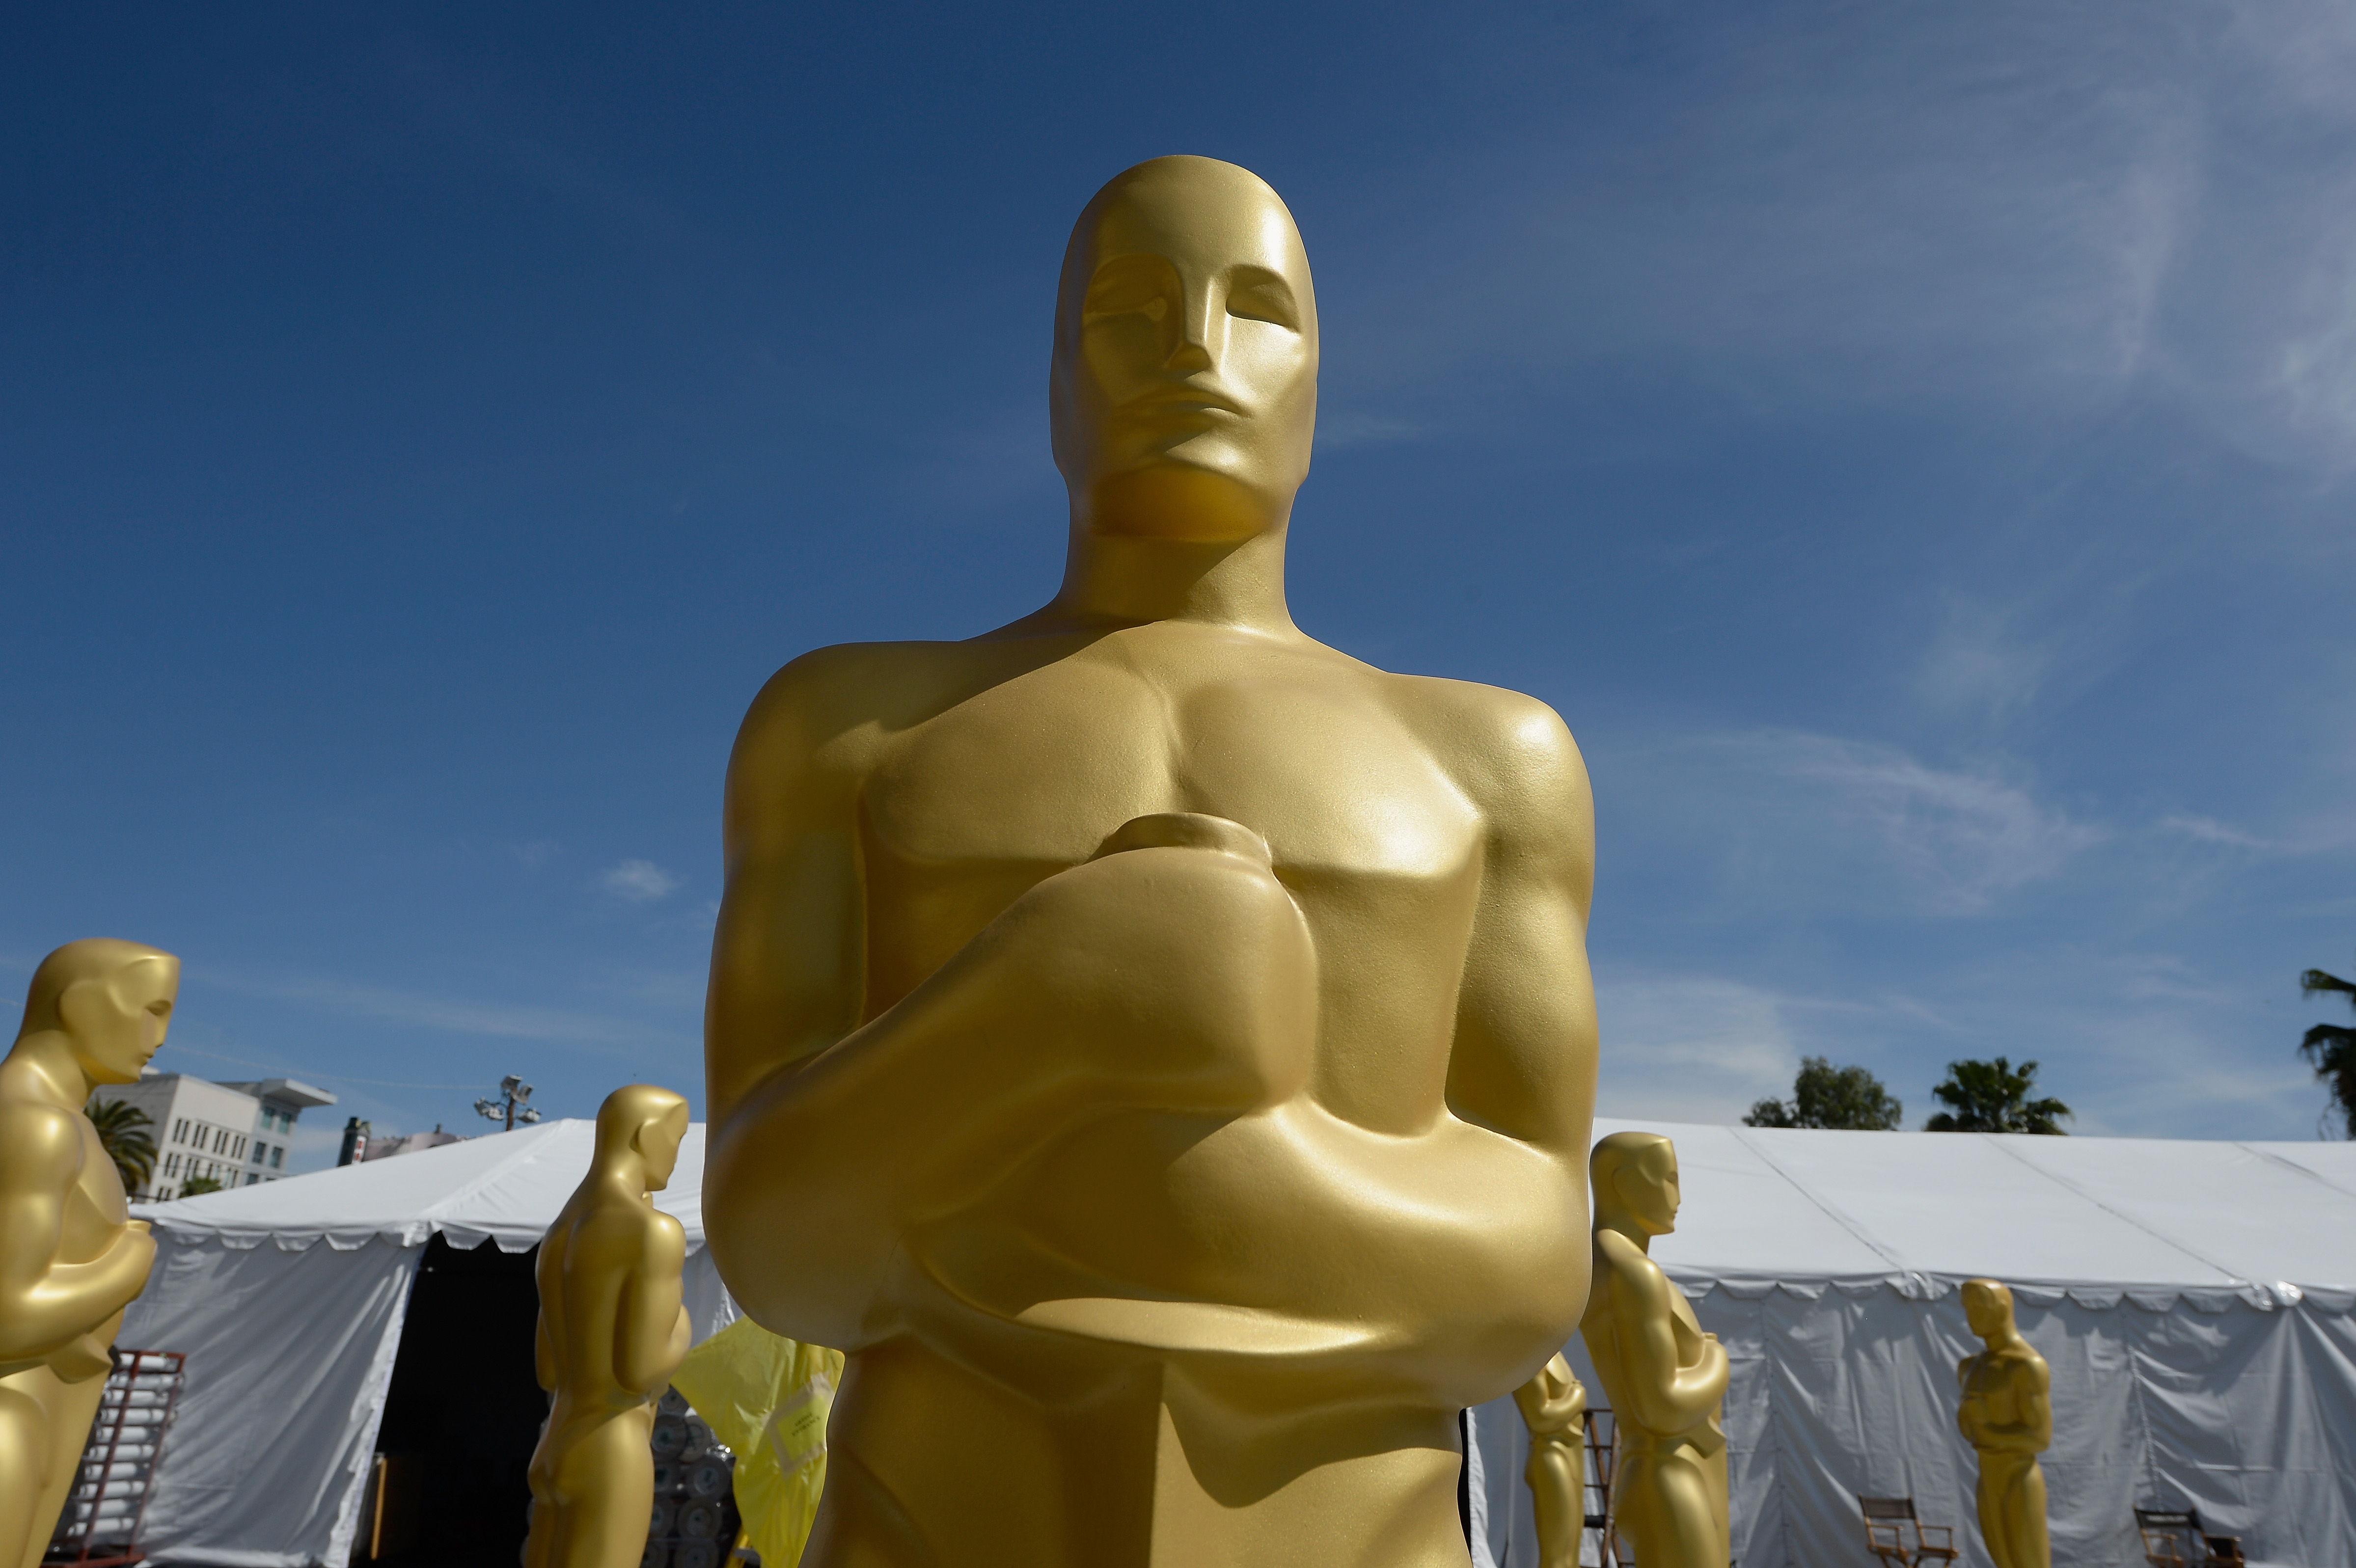 An Oscar statue is seen as preparations continue for the 88th Annual Academy Awards on Feb. 23, 2016 in Hollywood. (Kevork Djansezian—Getty Images)